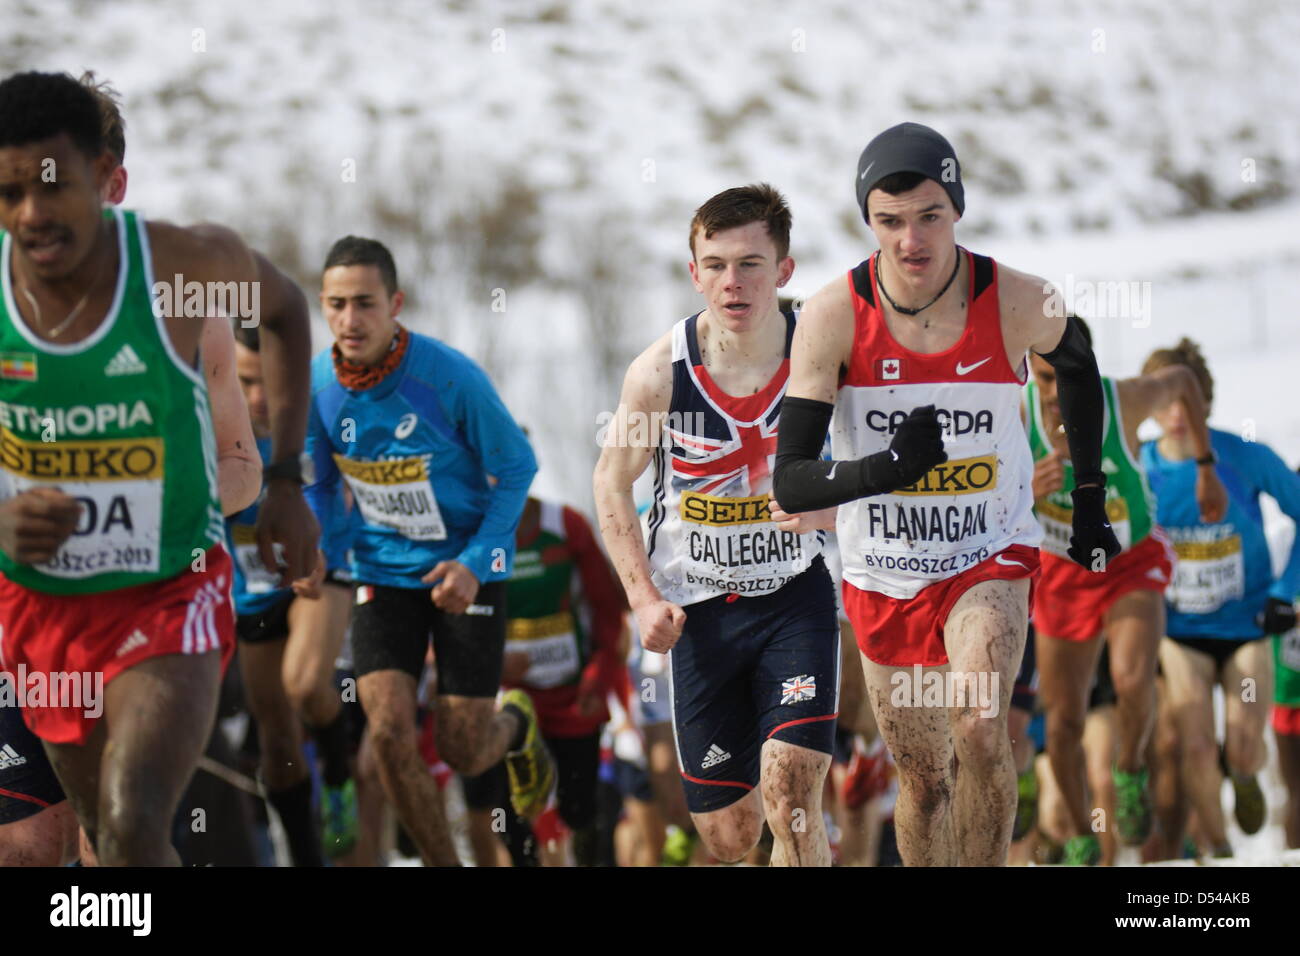 Bydgoszcz, Poland 24th, March 2013 IAAF World Cross Country Chamiponships. Junior Race Man.   Pictured: Michael Callegari. Credit: Michal Fludra/Alamy Live News Stock Photo